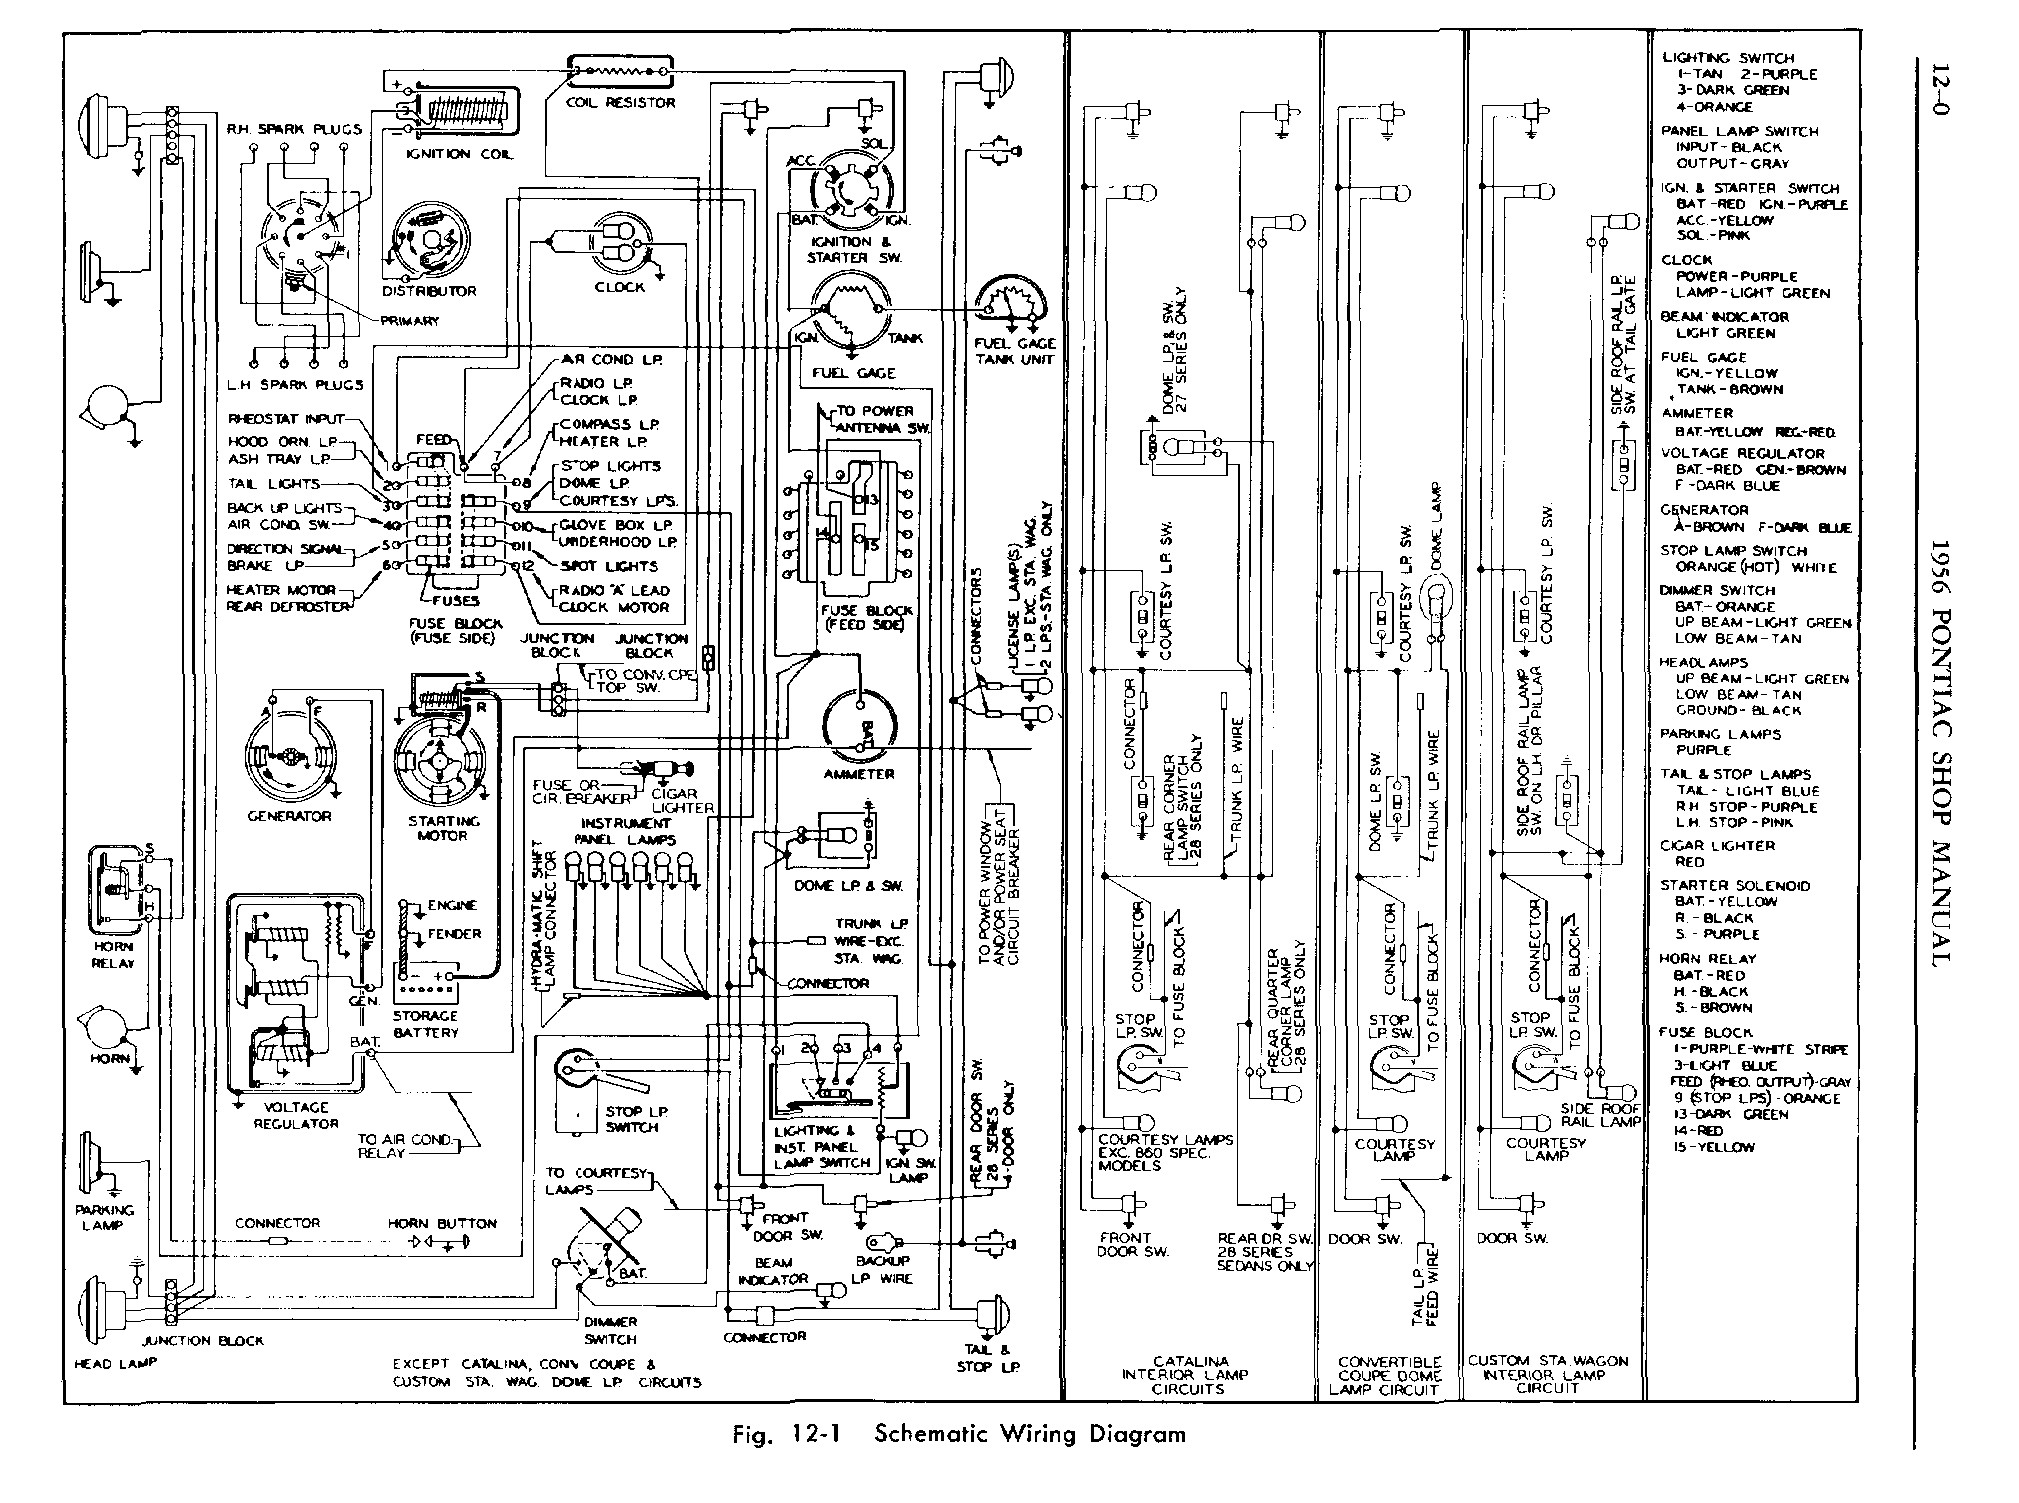 1956 Pontiac Shop Manual- Electrical Page 1 of 55